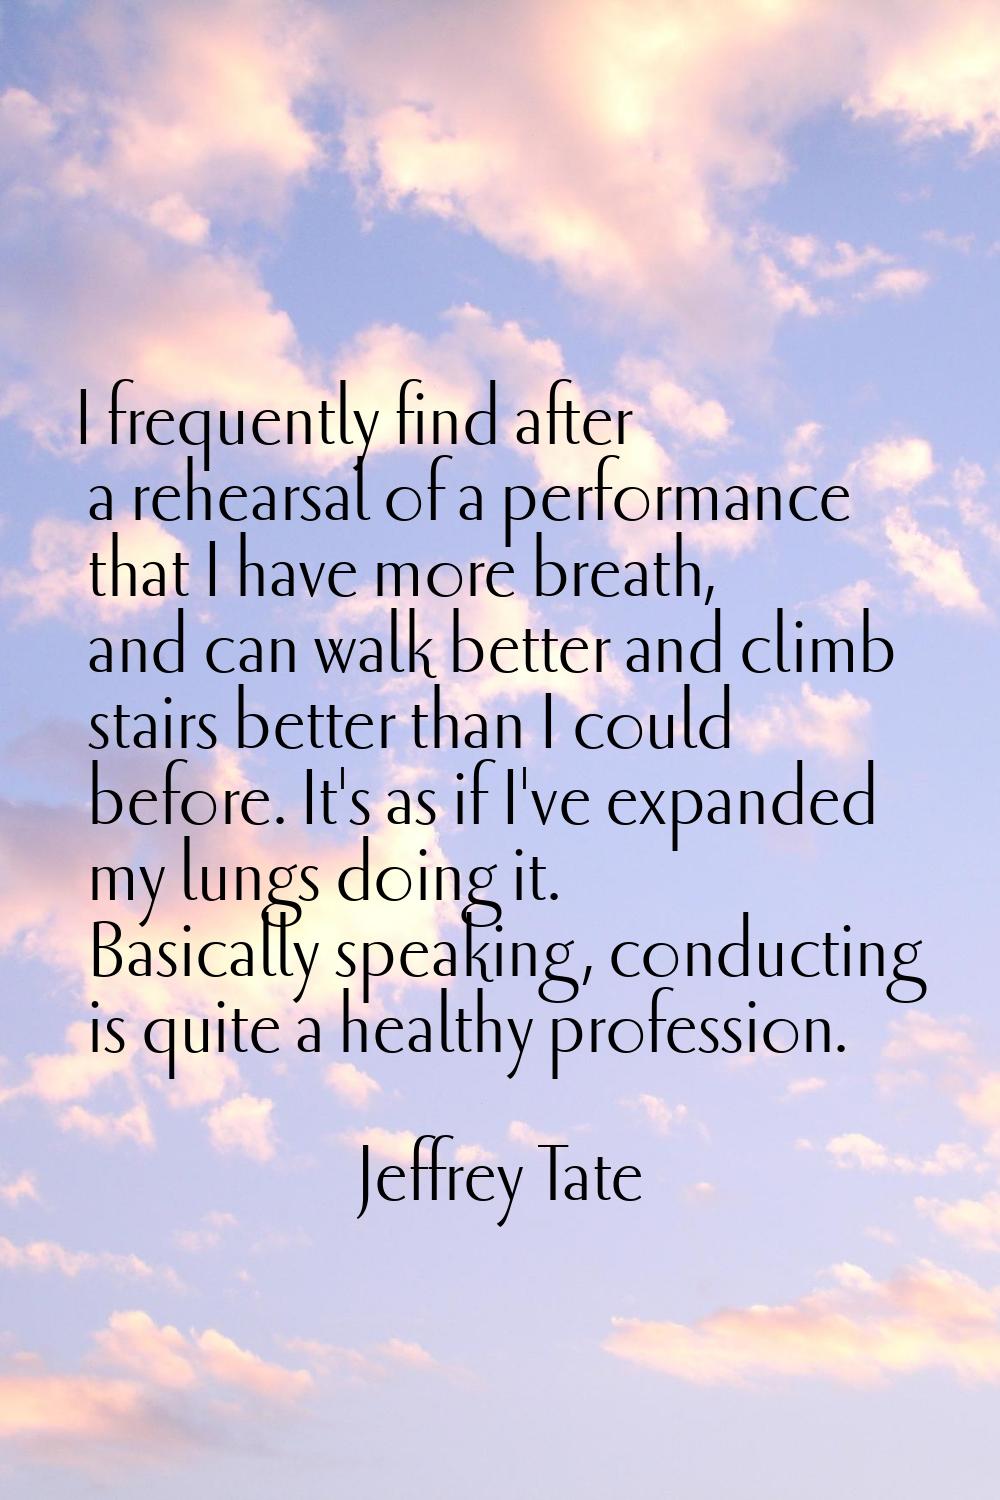 I frequently find after a rehearsal of a performance that I have more breath, and can walk better a